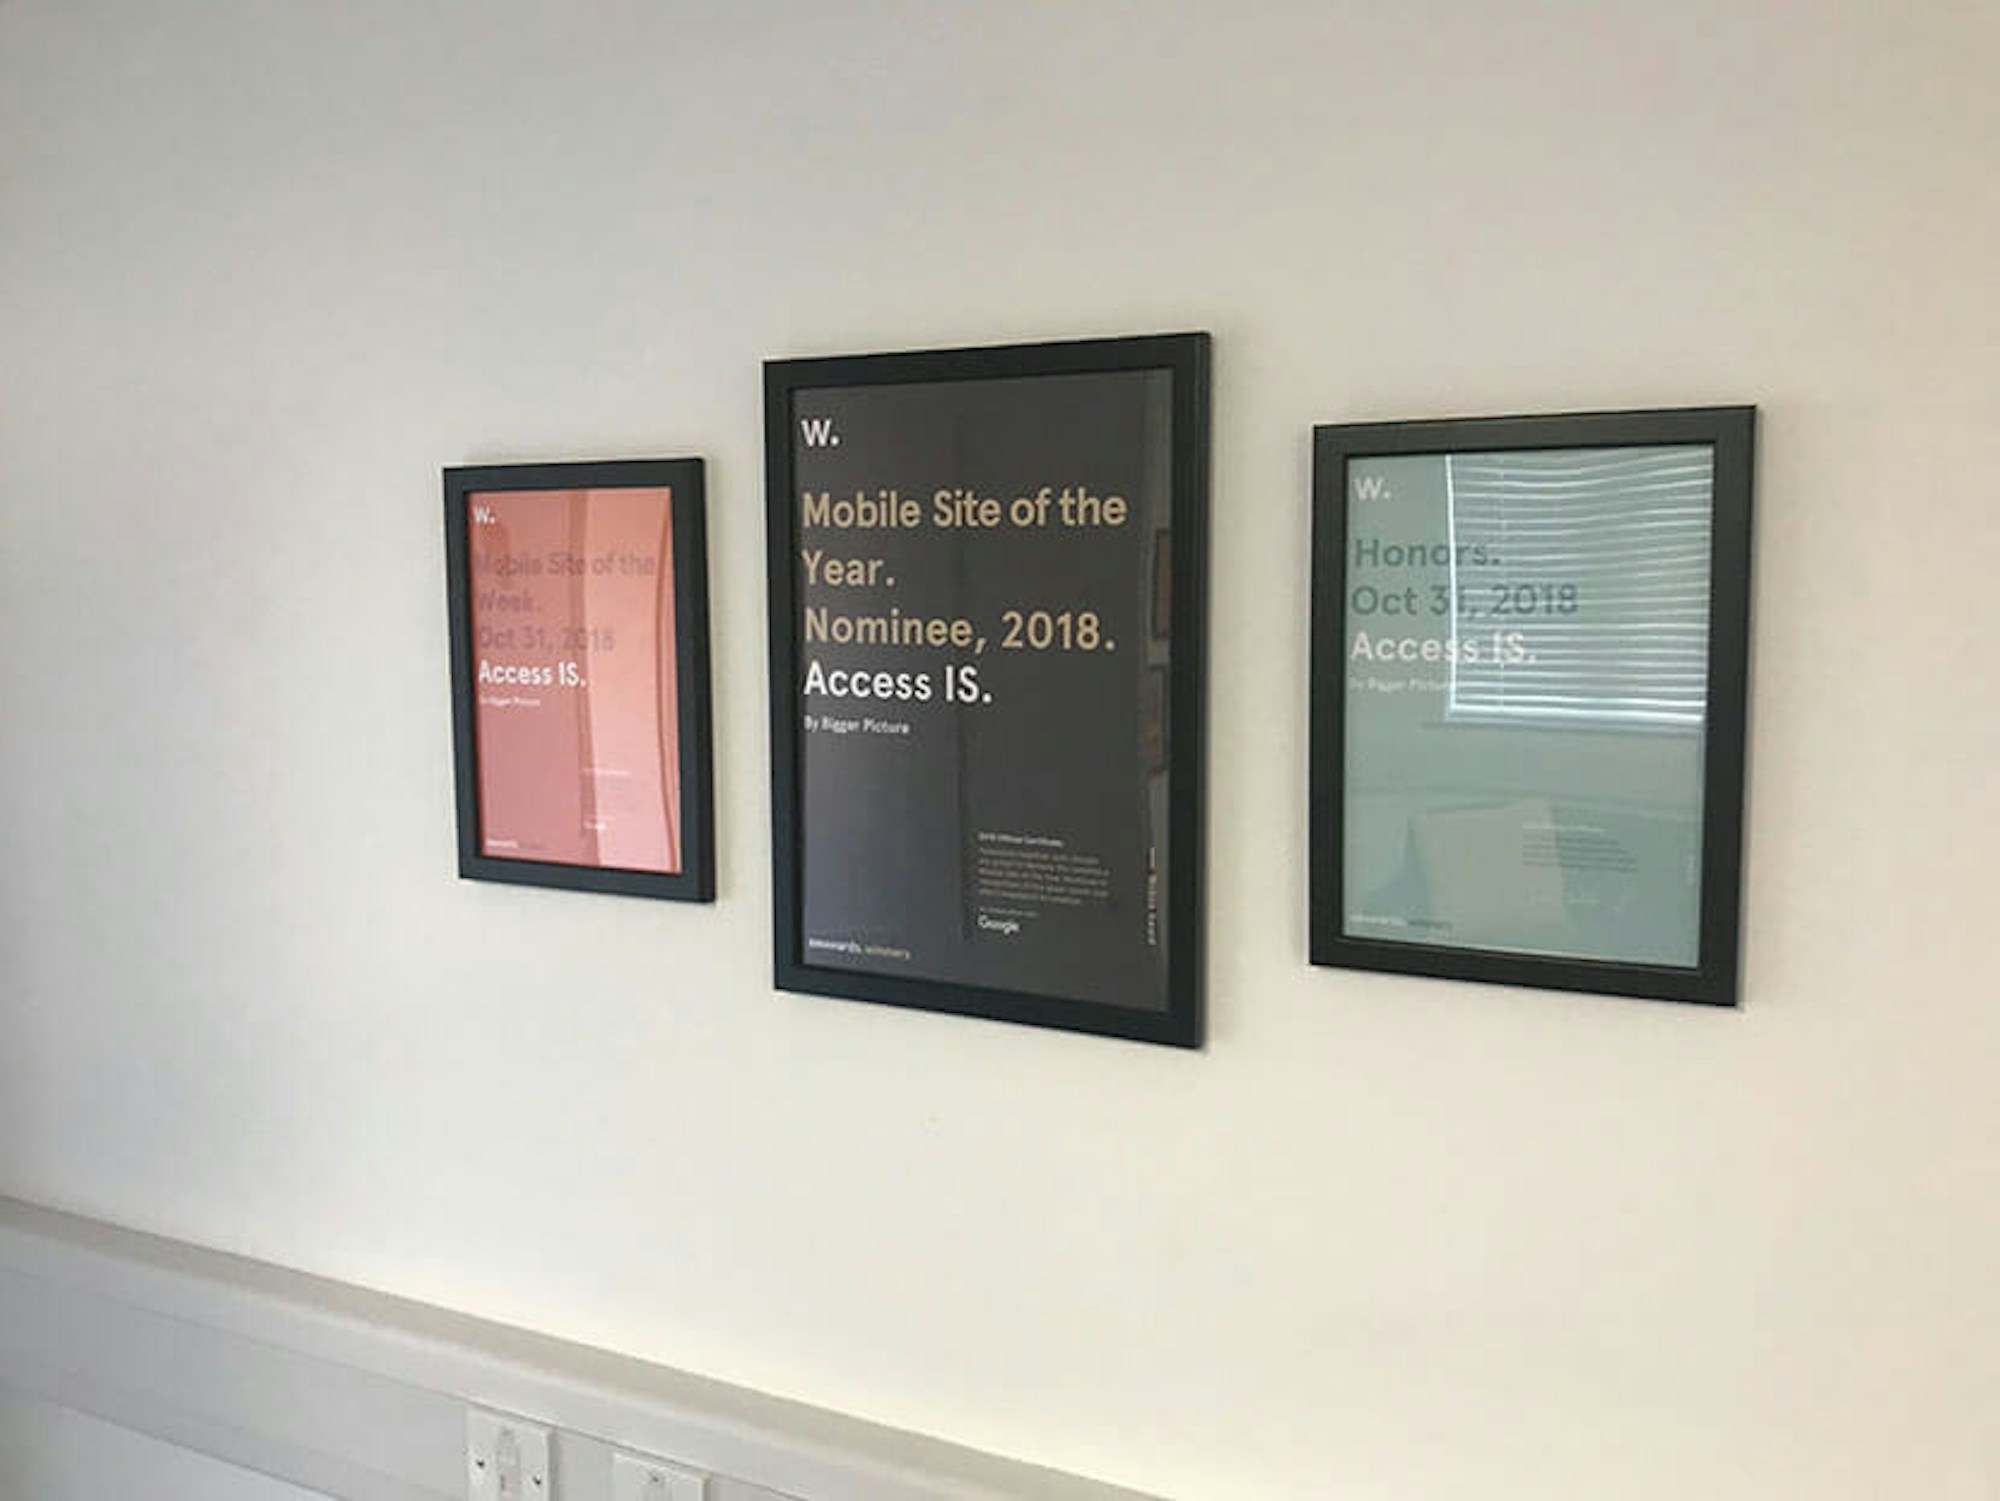 Bigger Picture's certificate wall